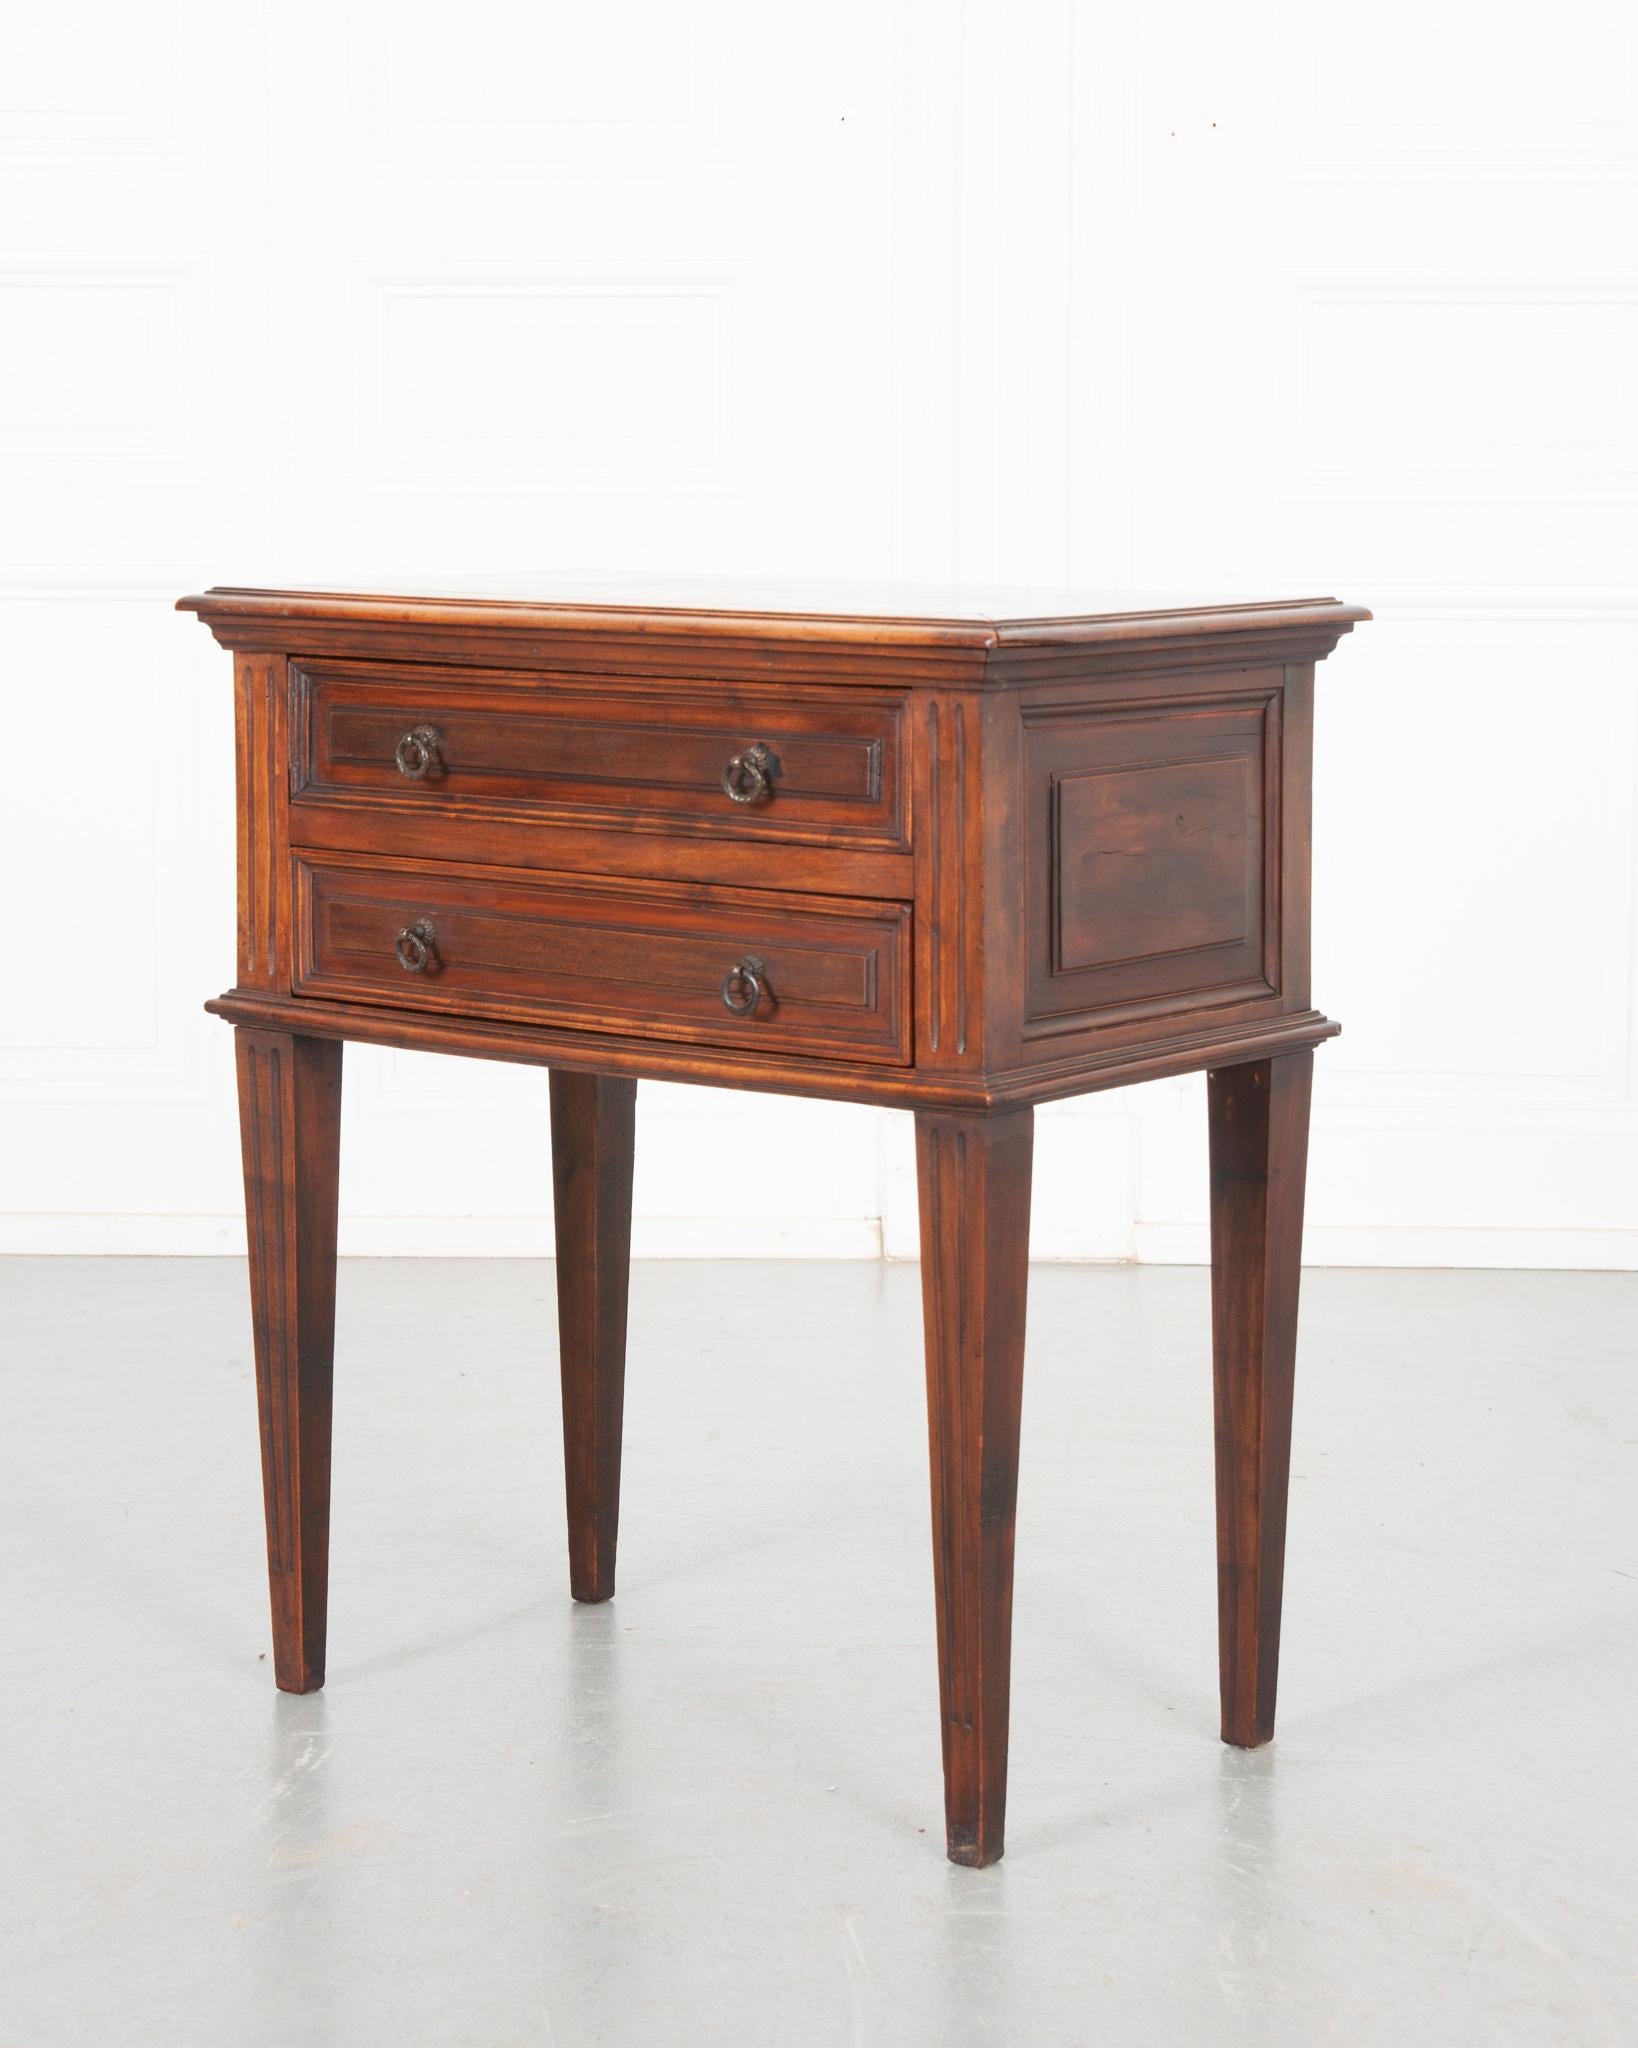 This unique side table was crafted in France, circa 1870. Both drawers feature thumbnail carving and a pair of small metal drop ring pulls. A pre-sectioned drawer and inserts provide a great amount of organization for small keepsakes. Fluting